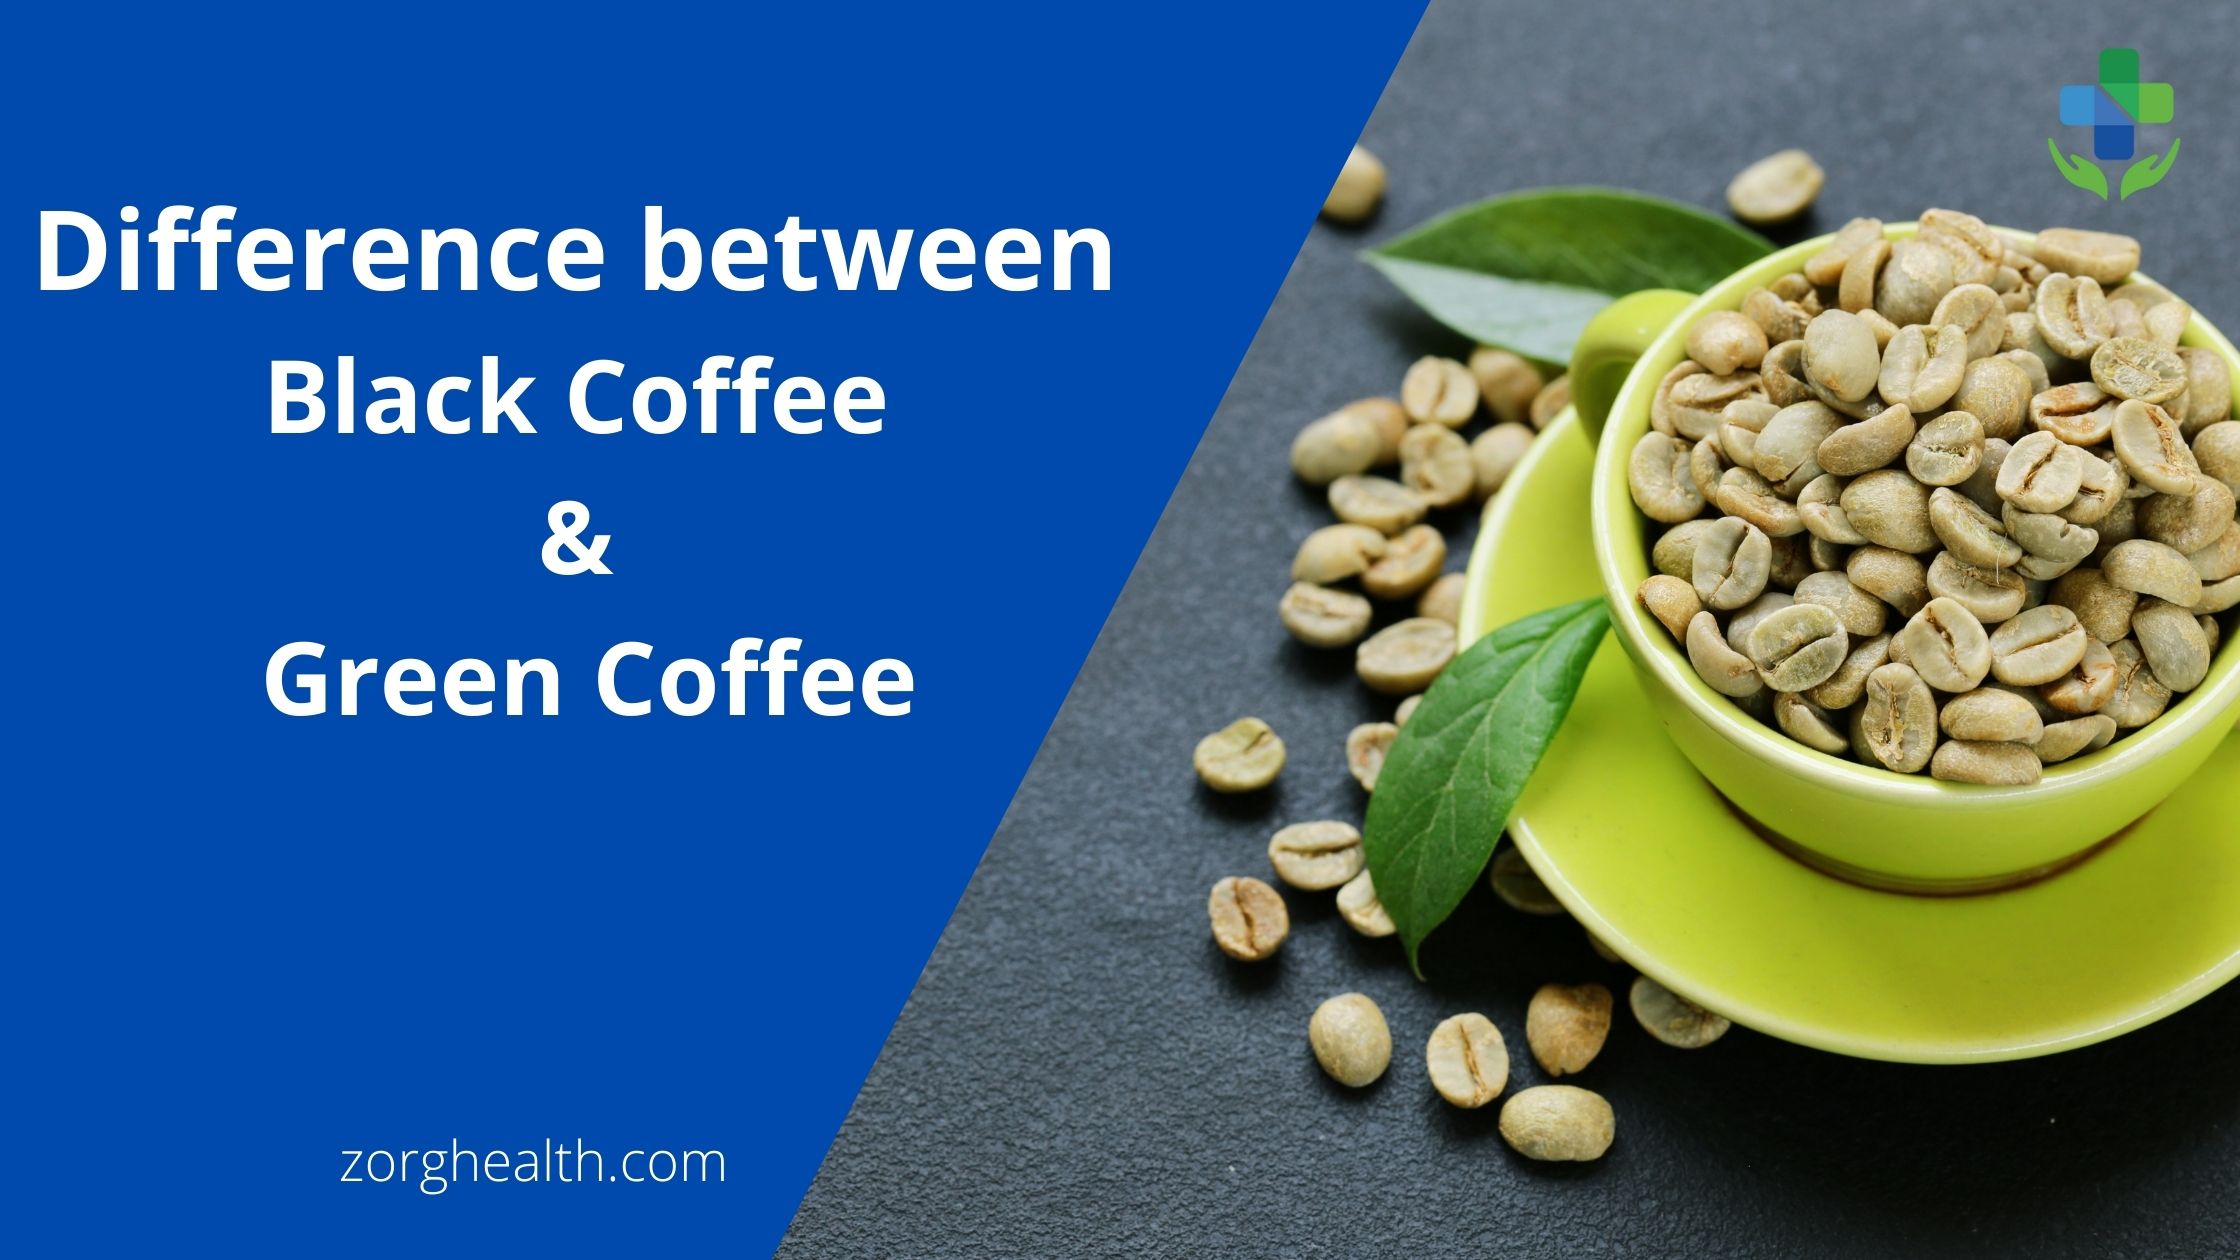 Difference between Black Coffee and Green Coffee